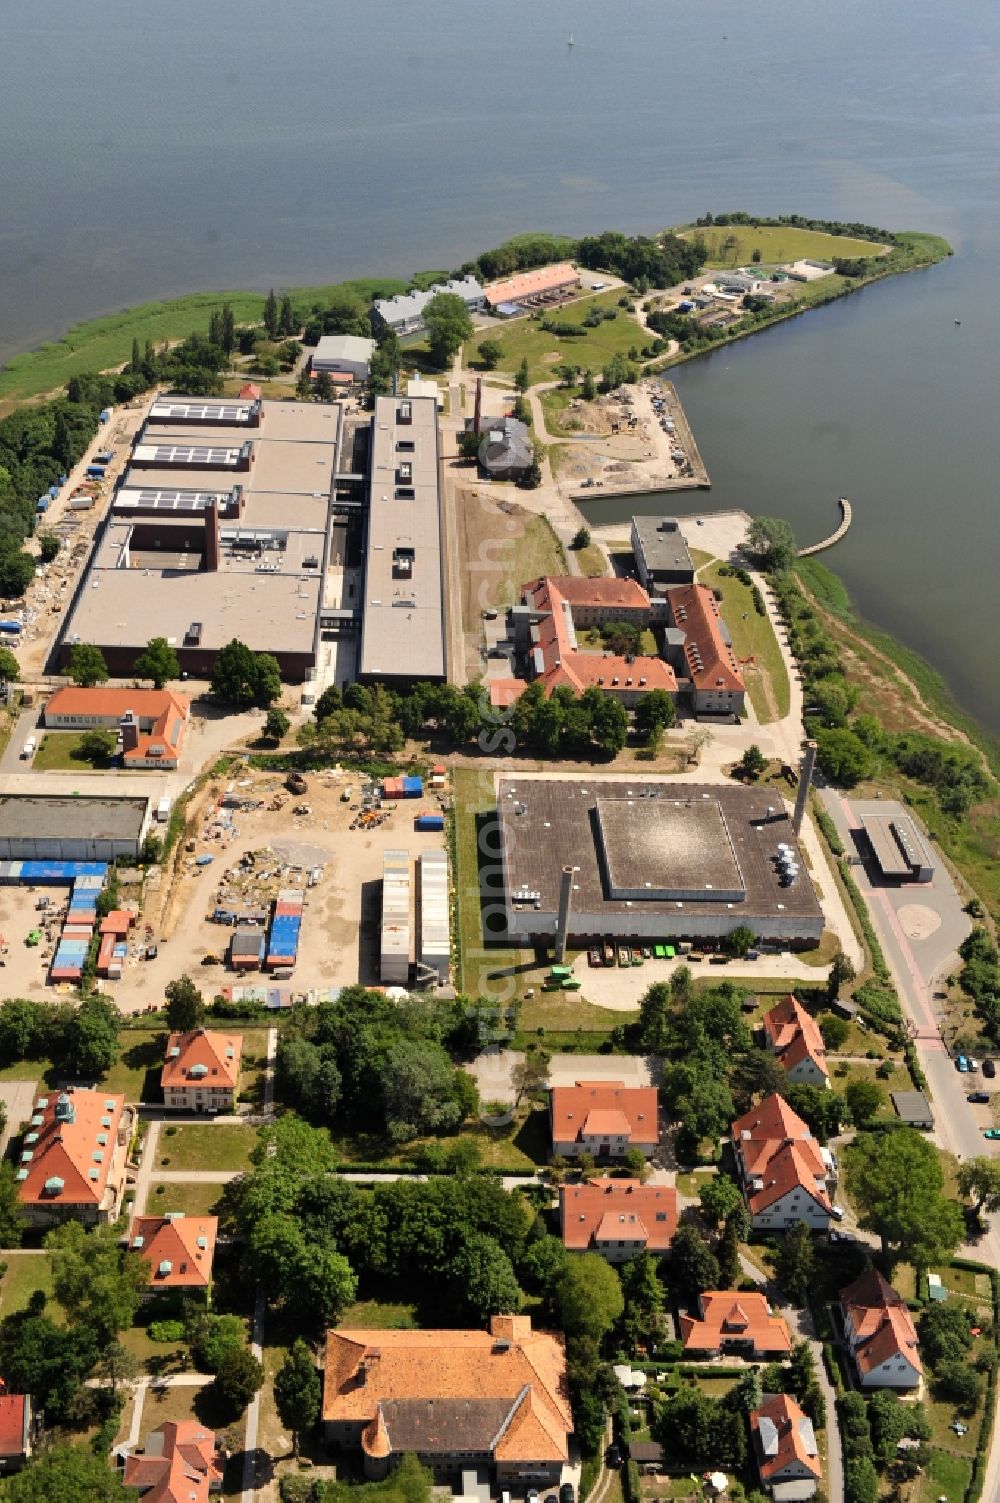 Riems from the bird's eye view: Extension of new building site at the building complex of the institute Friedrich-Loeffler-Institutes FLI in Riems in the state Mecklenburg - Western Pomerania, Germany